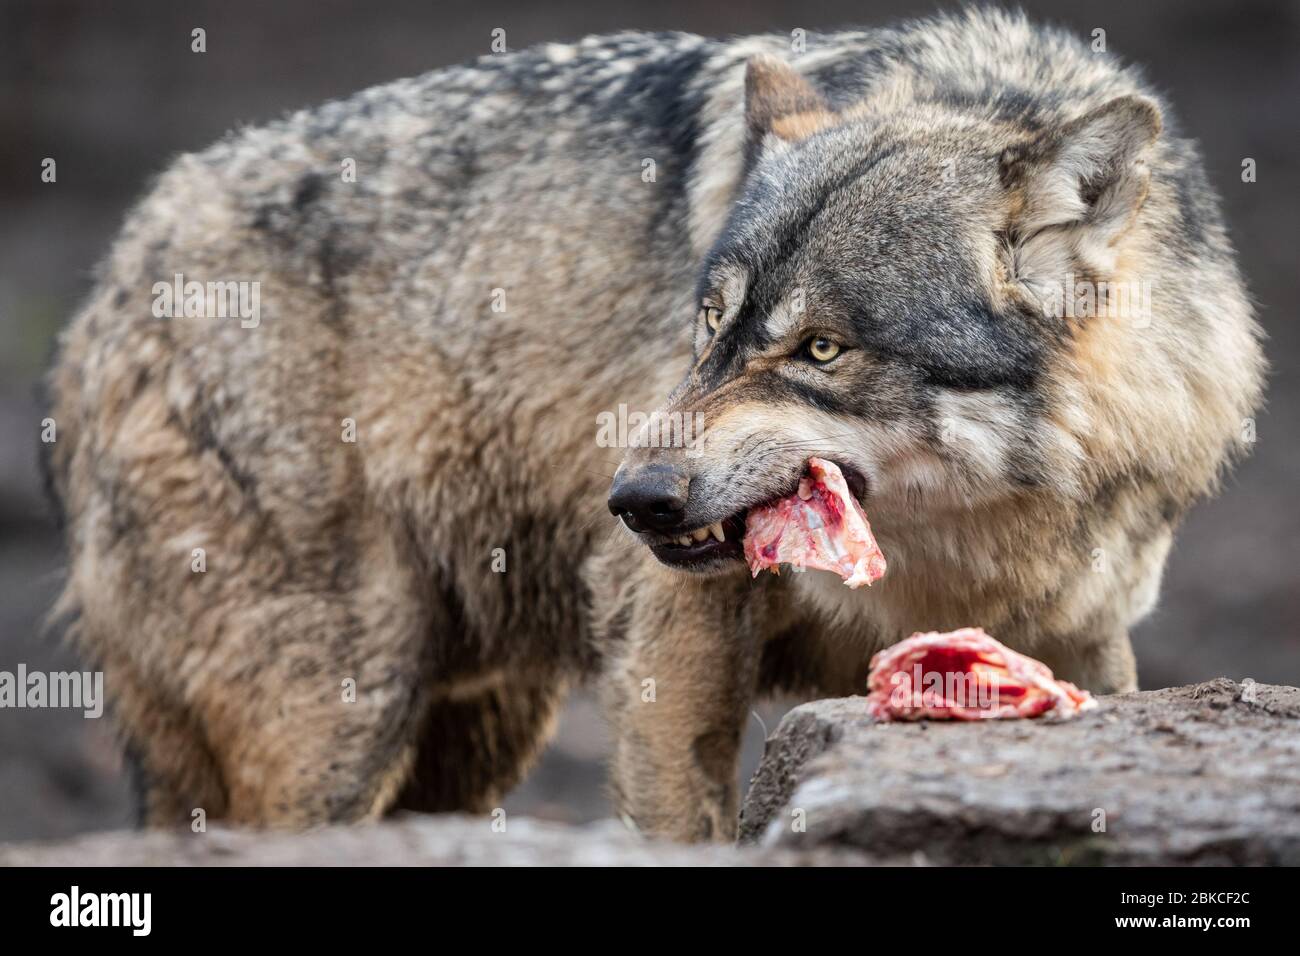 grey-wolf-eating-meat-in-the-forest-2BKCF2C.jpg